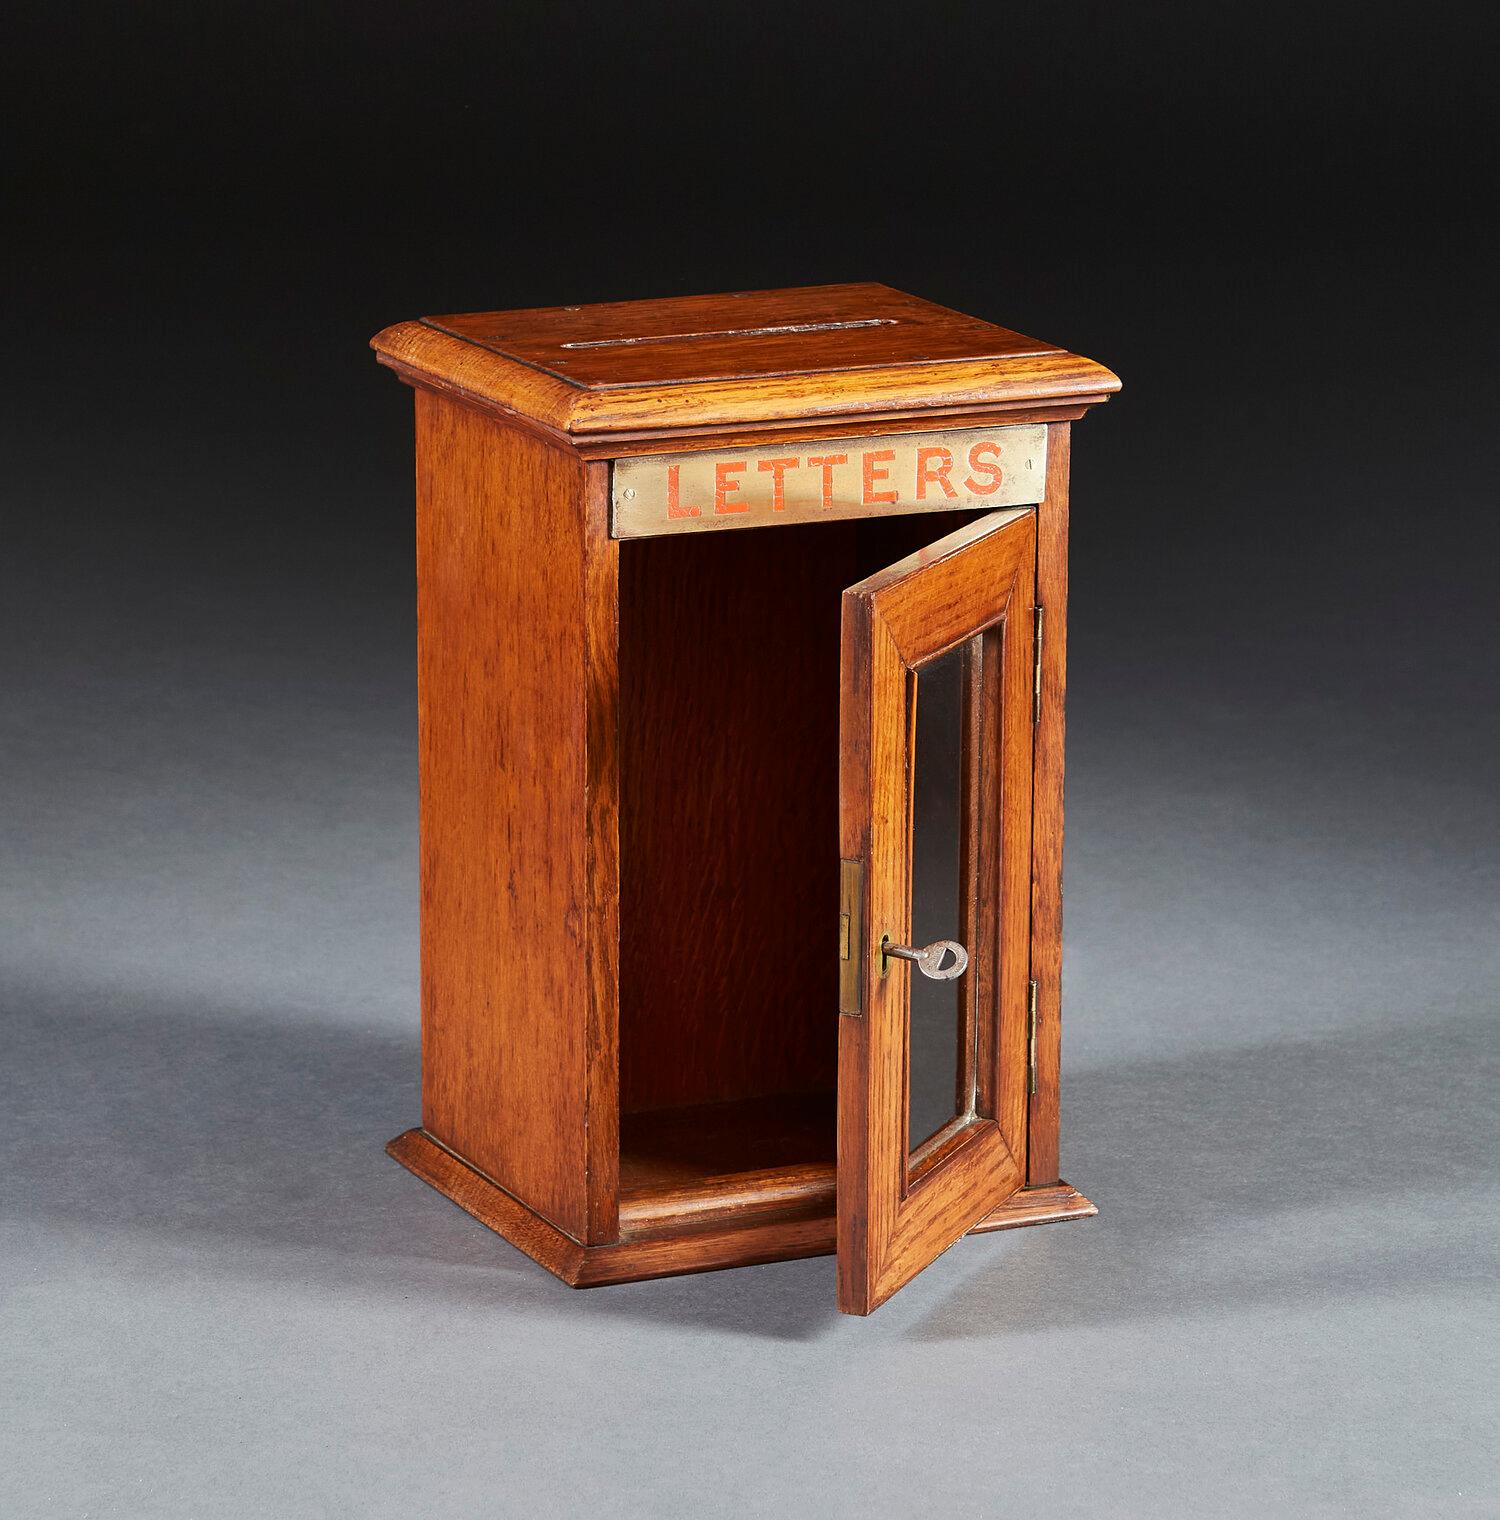 A mid nineteenth century oak table top letter box with brass sign to the front, opening with a locked window, with a slot to the top.

Provenance: From the Bishop of Norwich’s residence.